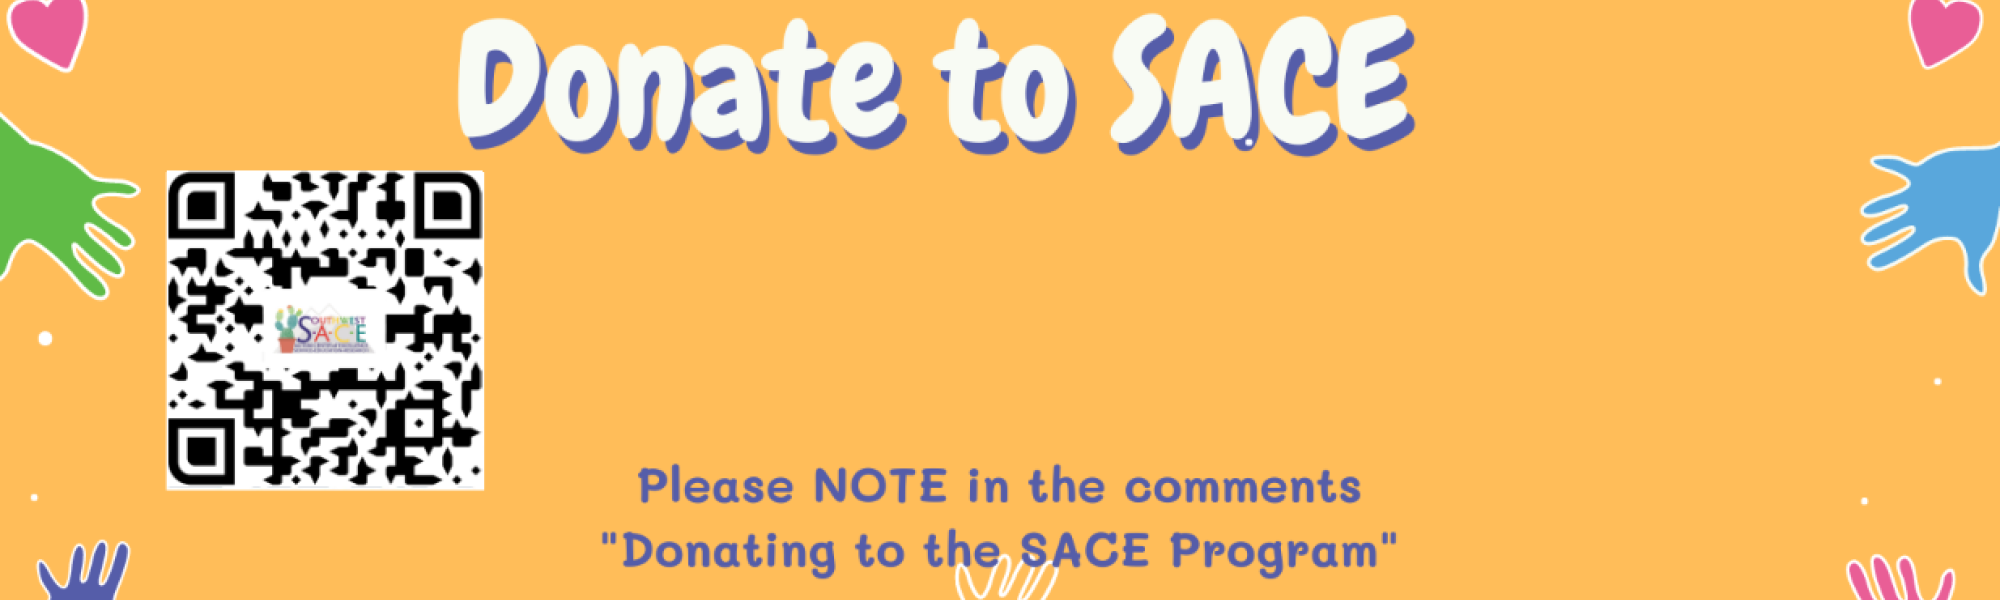 Sace Donation Graphic